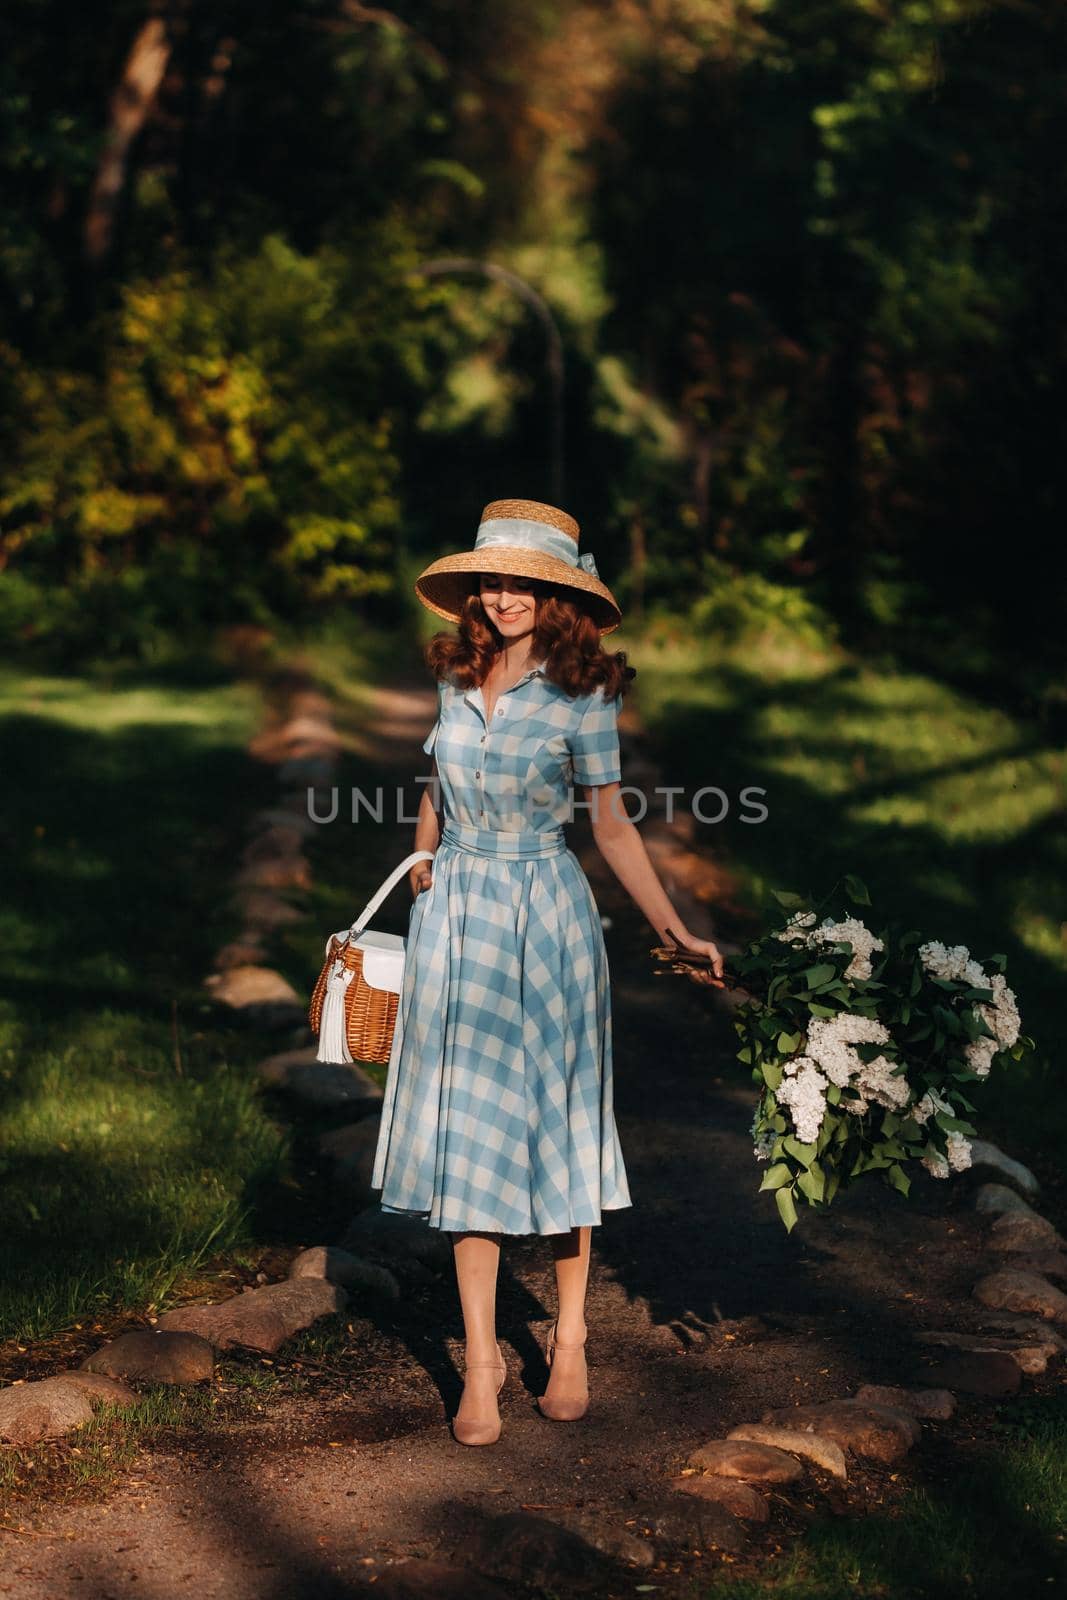 Portrait of a beautiful girl with long hair, a straw hat and a long summer dress with lilac flowers in the garden.